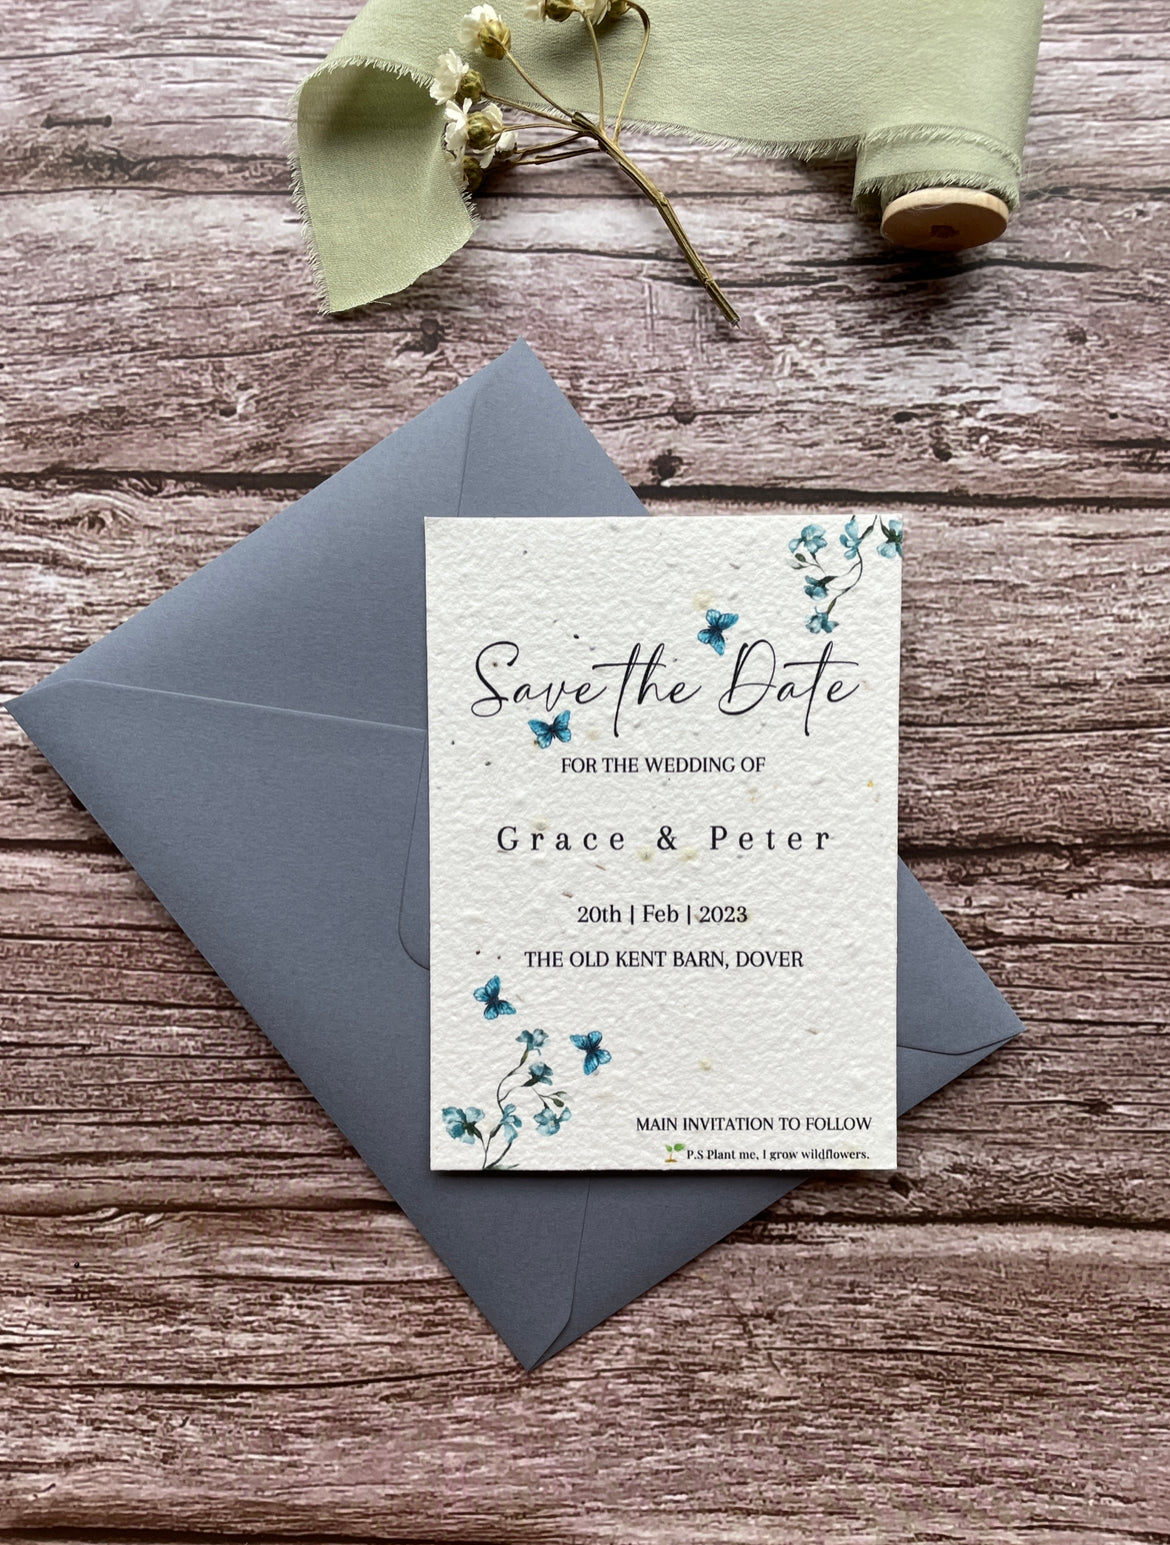 Plantable Wedding Save the Date Cards - Dusty Blue